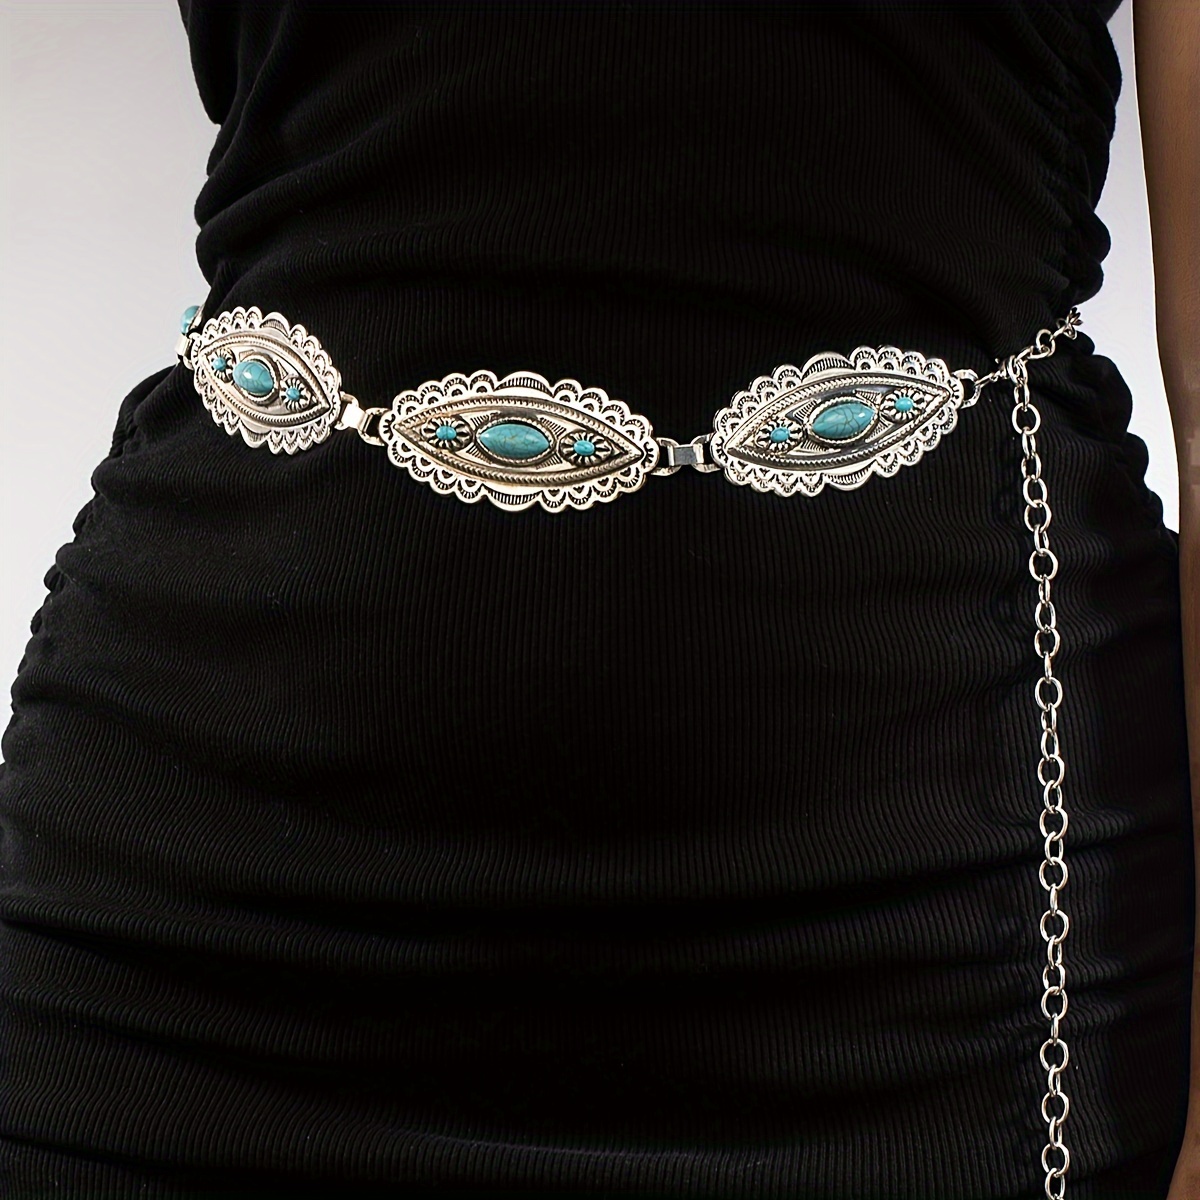 

Boho Turquoise Concho Belt Vintage Carved Oval Chain Belts For Women Adjustable Silvery Metal Body Jewelry Elegant Waist Chain